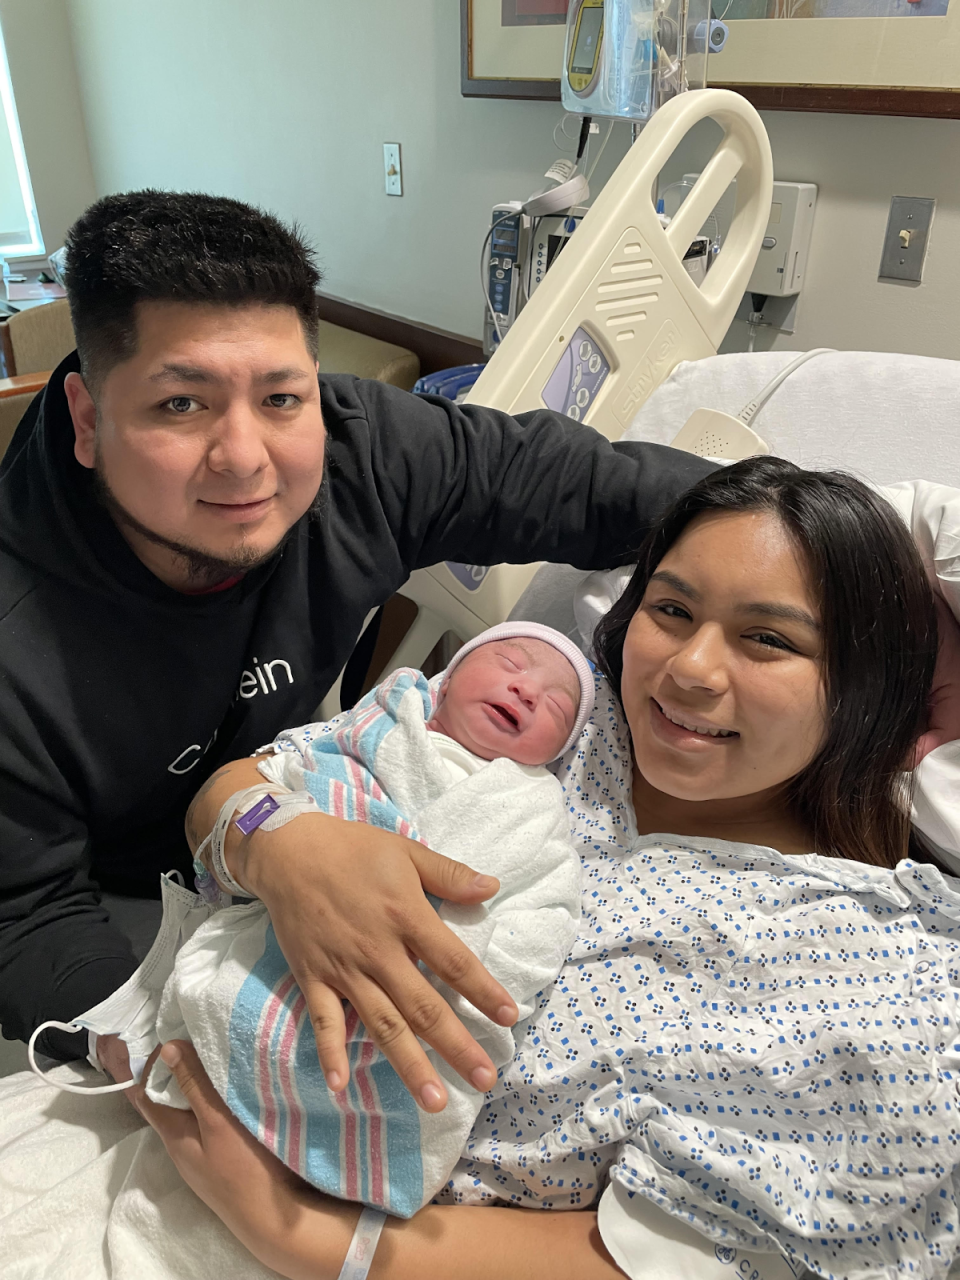 Raritan Bay Medical Center in Perth Amboy welcomed baby girl, Samantha Garcia Alanis, at 12:21 p.m. to mom Alondra Nayeli Garcia Alanis and dad Zenon Martinez. Samantha weighed 6 pounds 6 ounces and measured 19.25 inches.